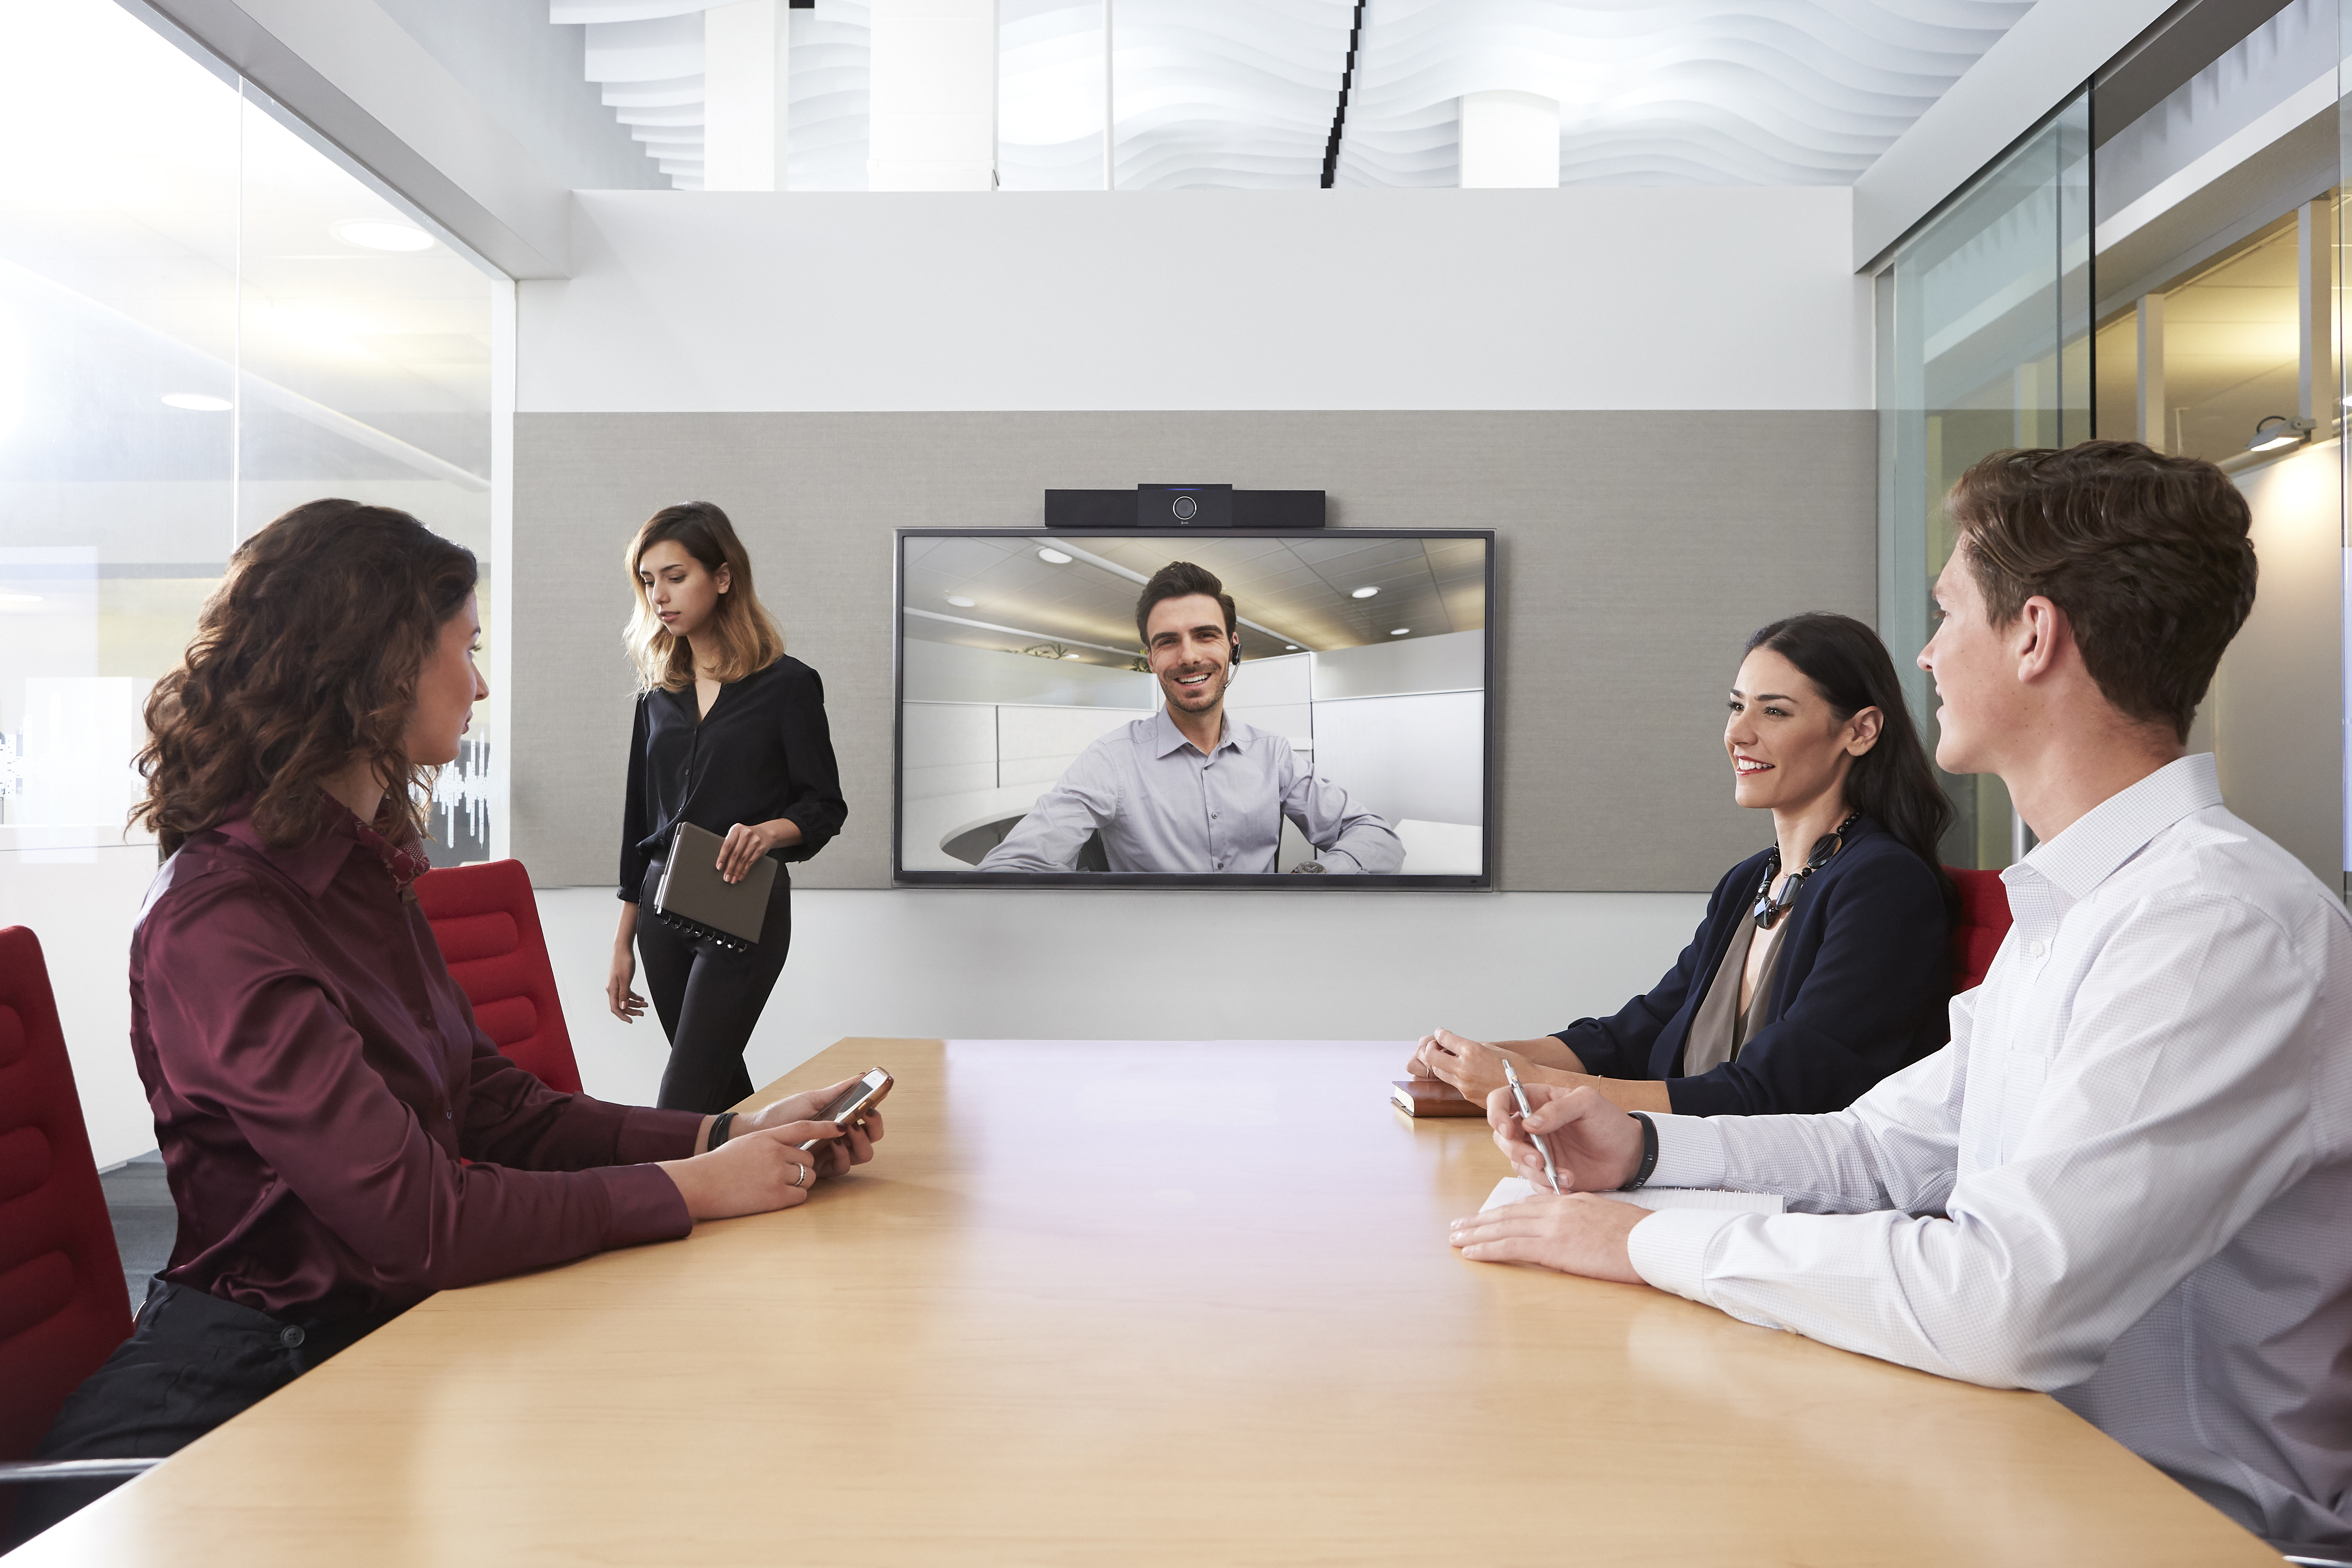 Elisa Videra designs, delivers and maintains video conferencing services including Microsoft, Pexip, Zoom and Cisco.